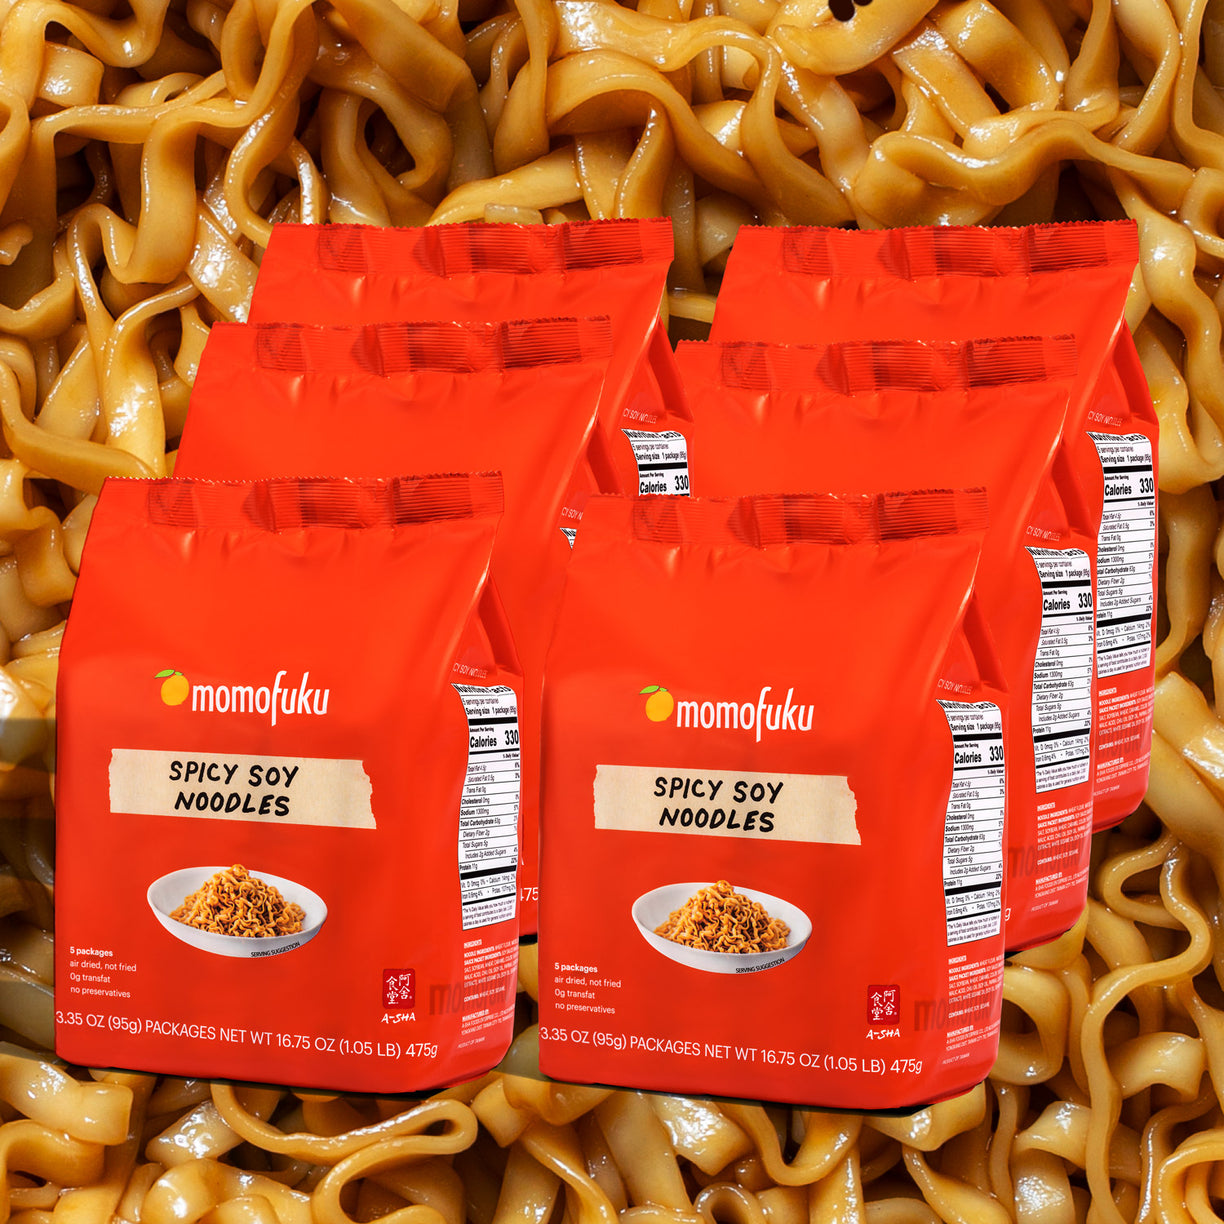 30 servings of spicy soy noodles